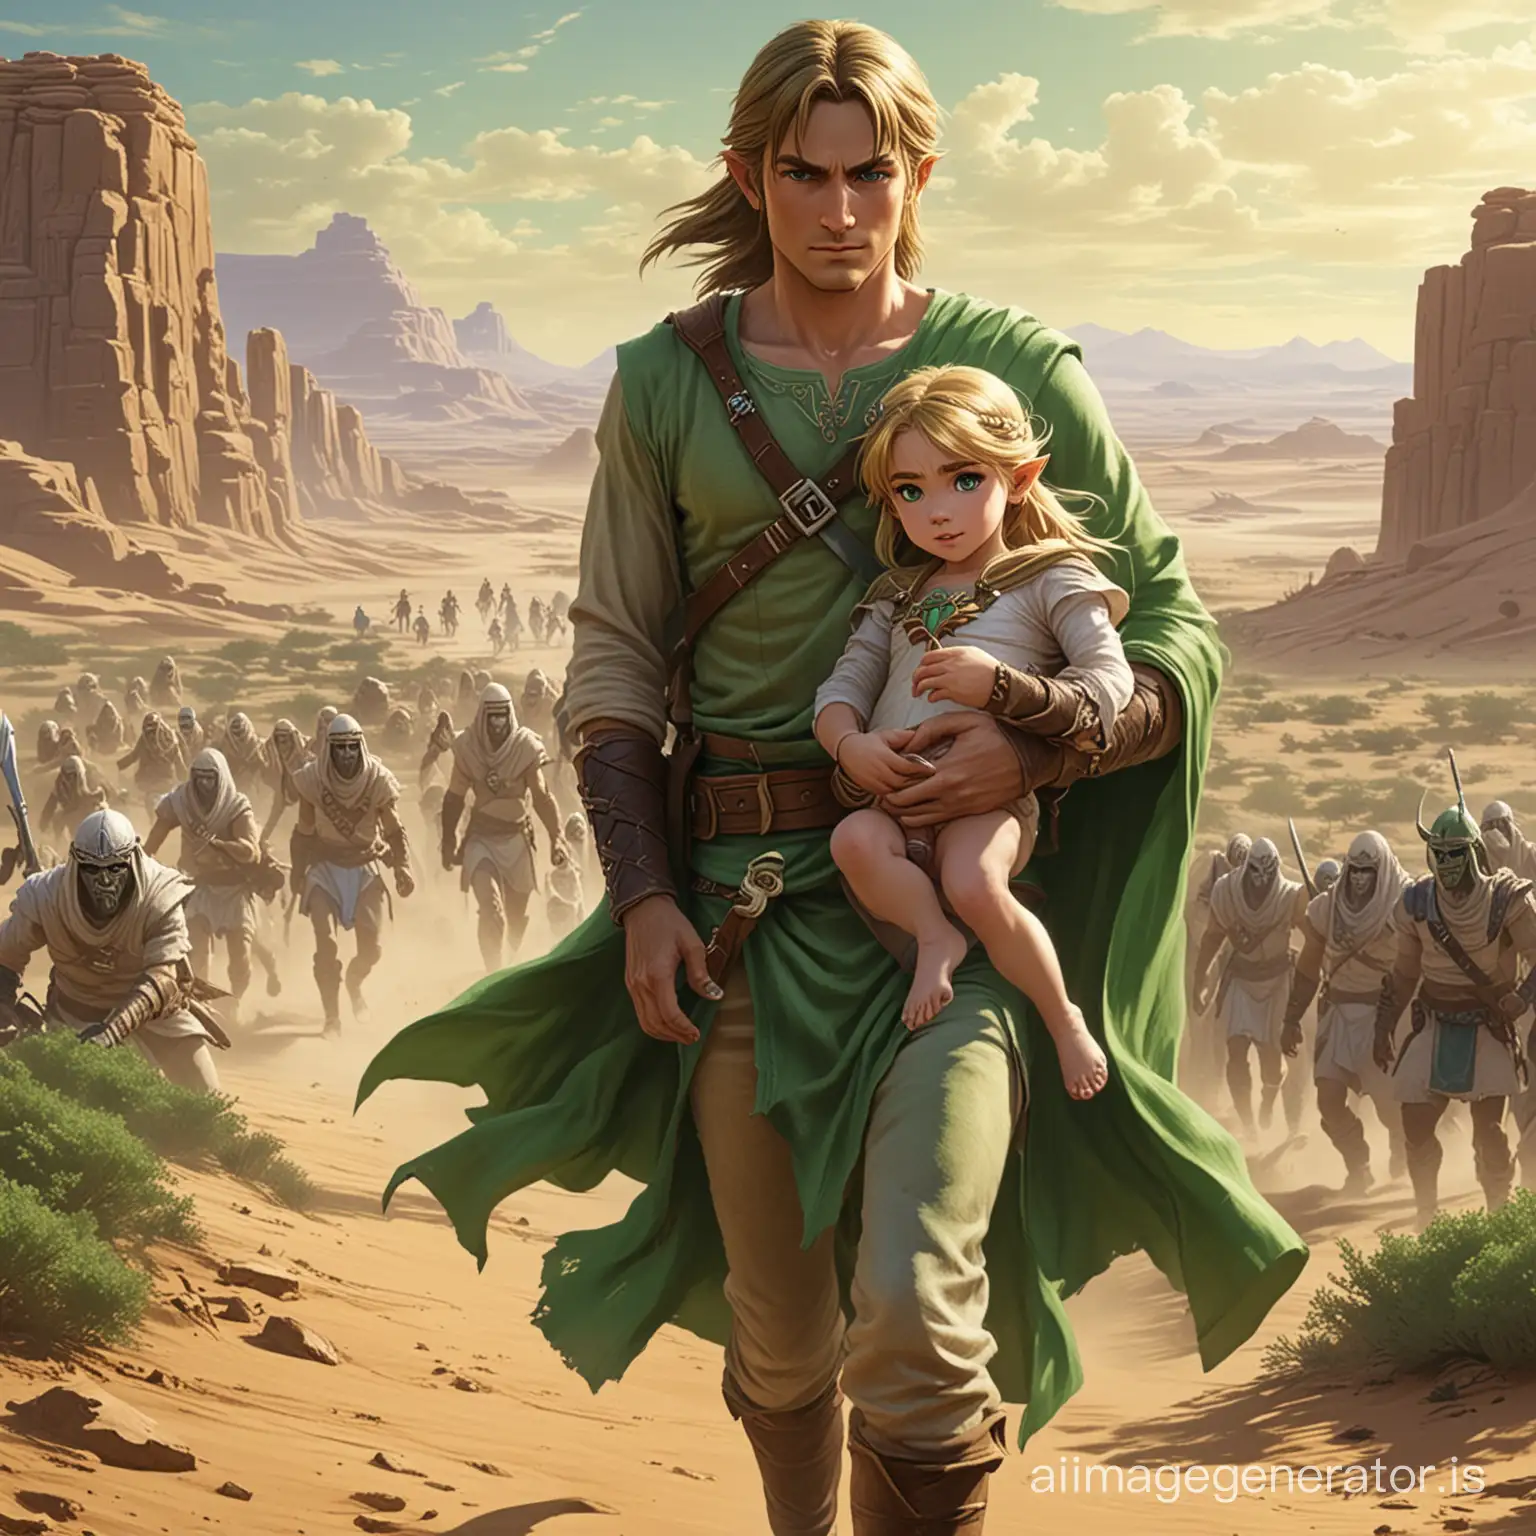 Link clad in green tunic, carrying naked Princess Zelda in his arms through the desert, while being chased by mummies.